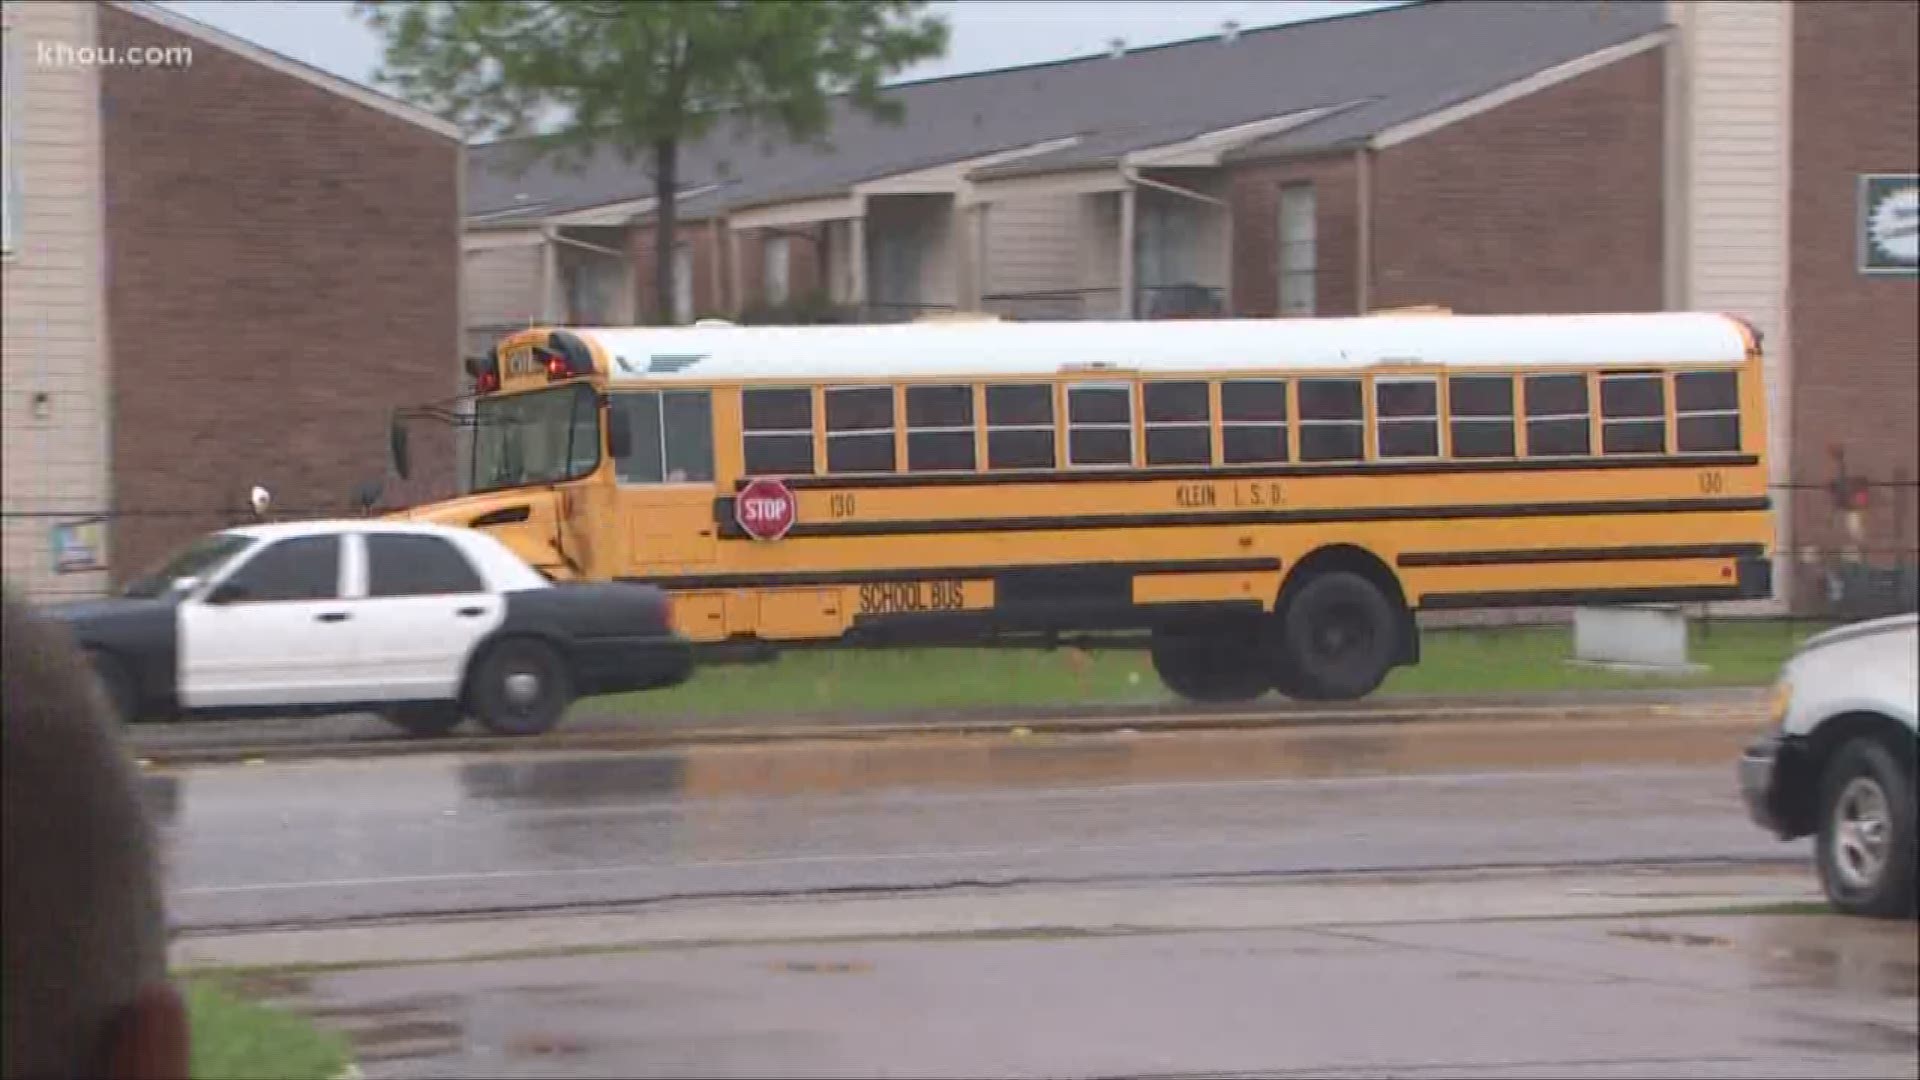 After three children died in Indiana after being hit by a vehicle when they got off a school bus, KHOU 11 reporter Melissa Correa saw first hand how more and more drivers do not stop for school buses when they are picking up and dropping off children.